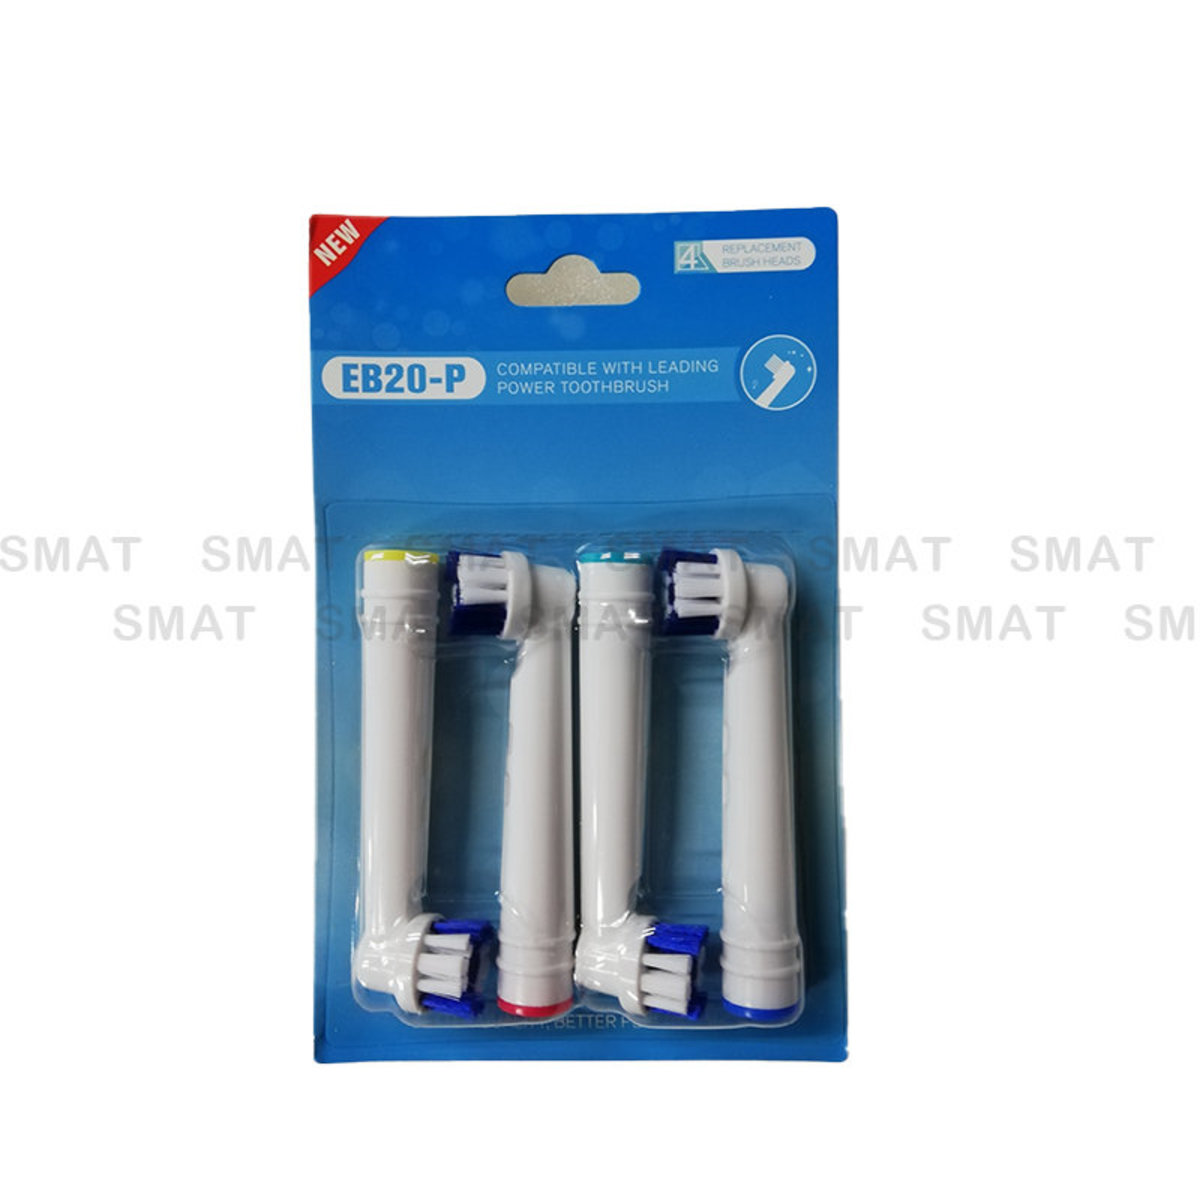 4pcs set Replacement Heads for Oral B / Braun Electric Toothbrush